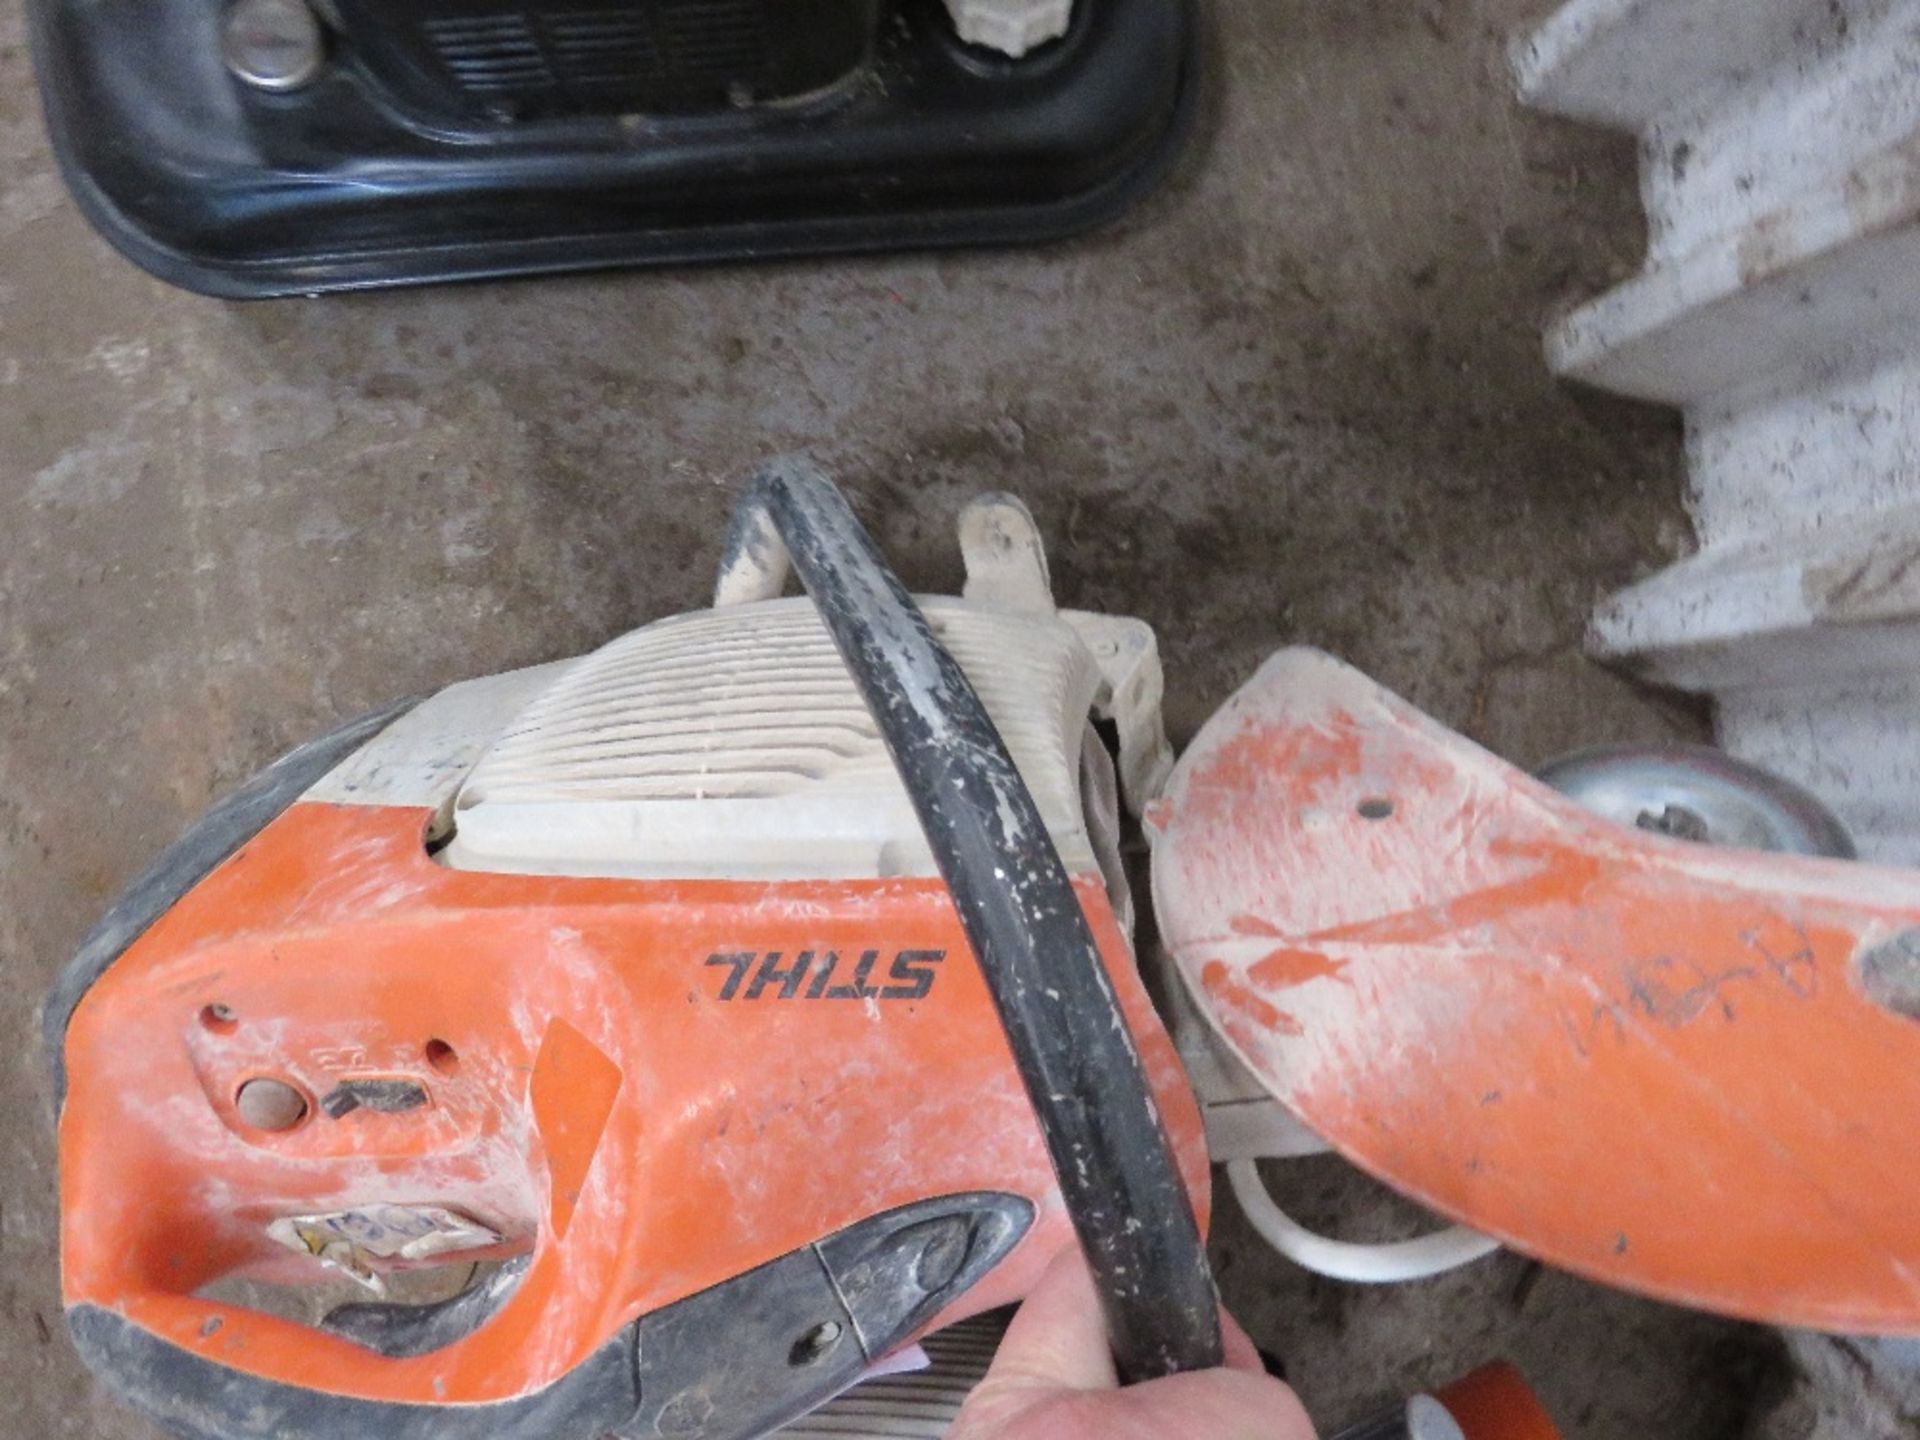 STIHL TS410 PETROL SAW, UNTESTED, CONDITION UNKNOWN. - Image 2 of 3